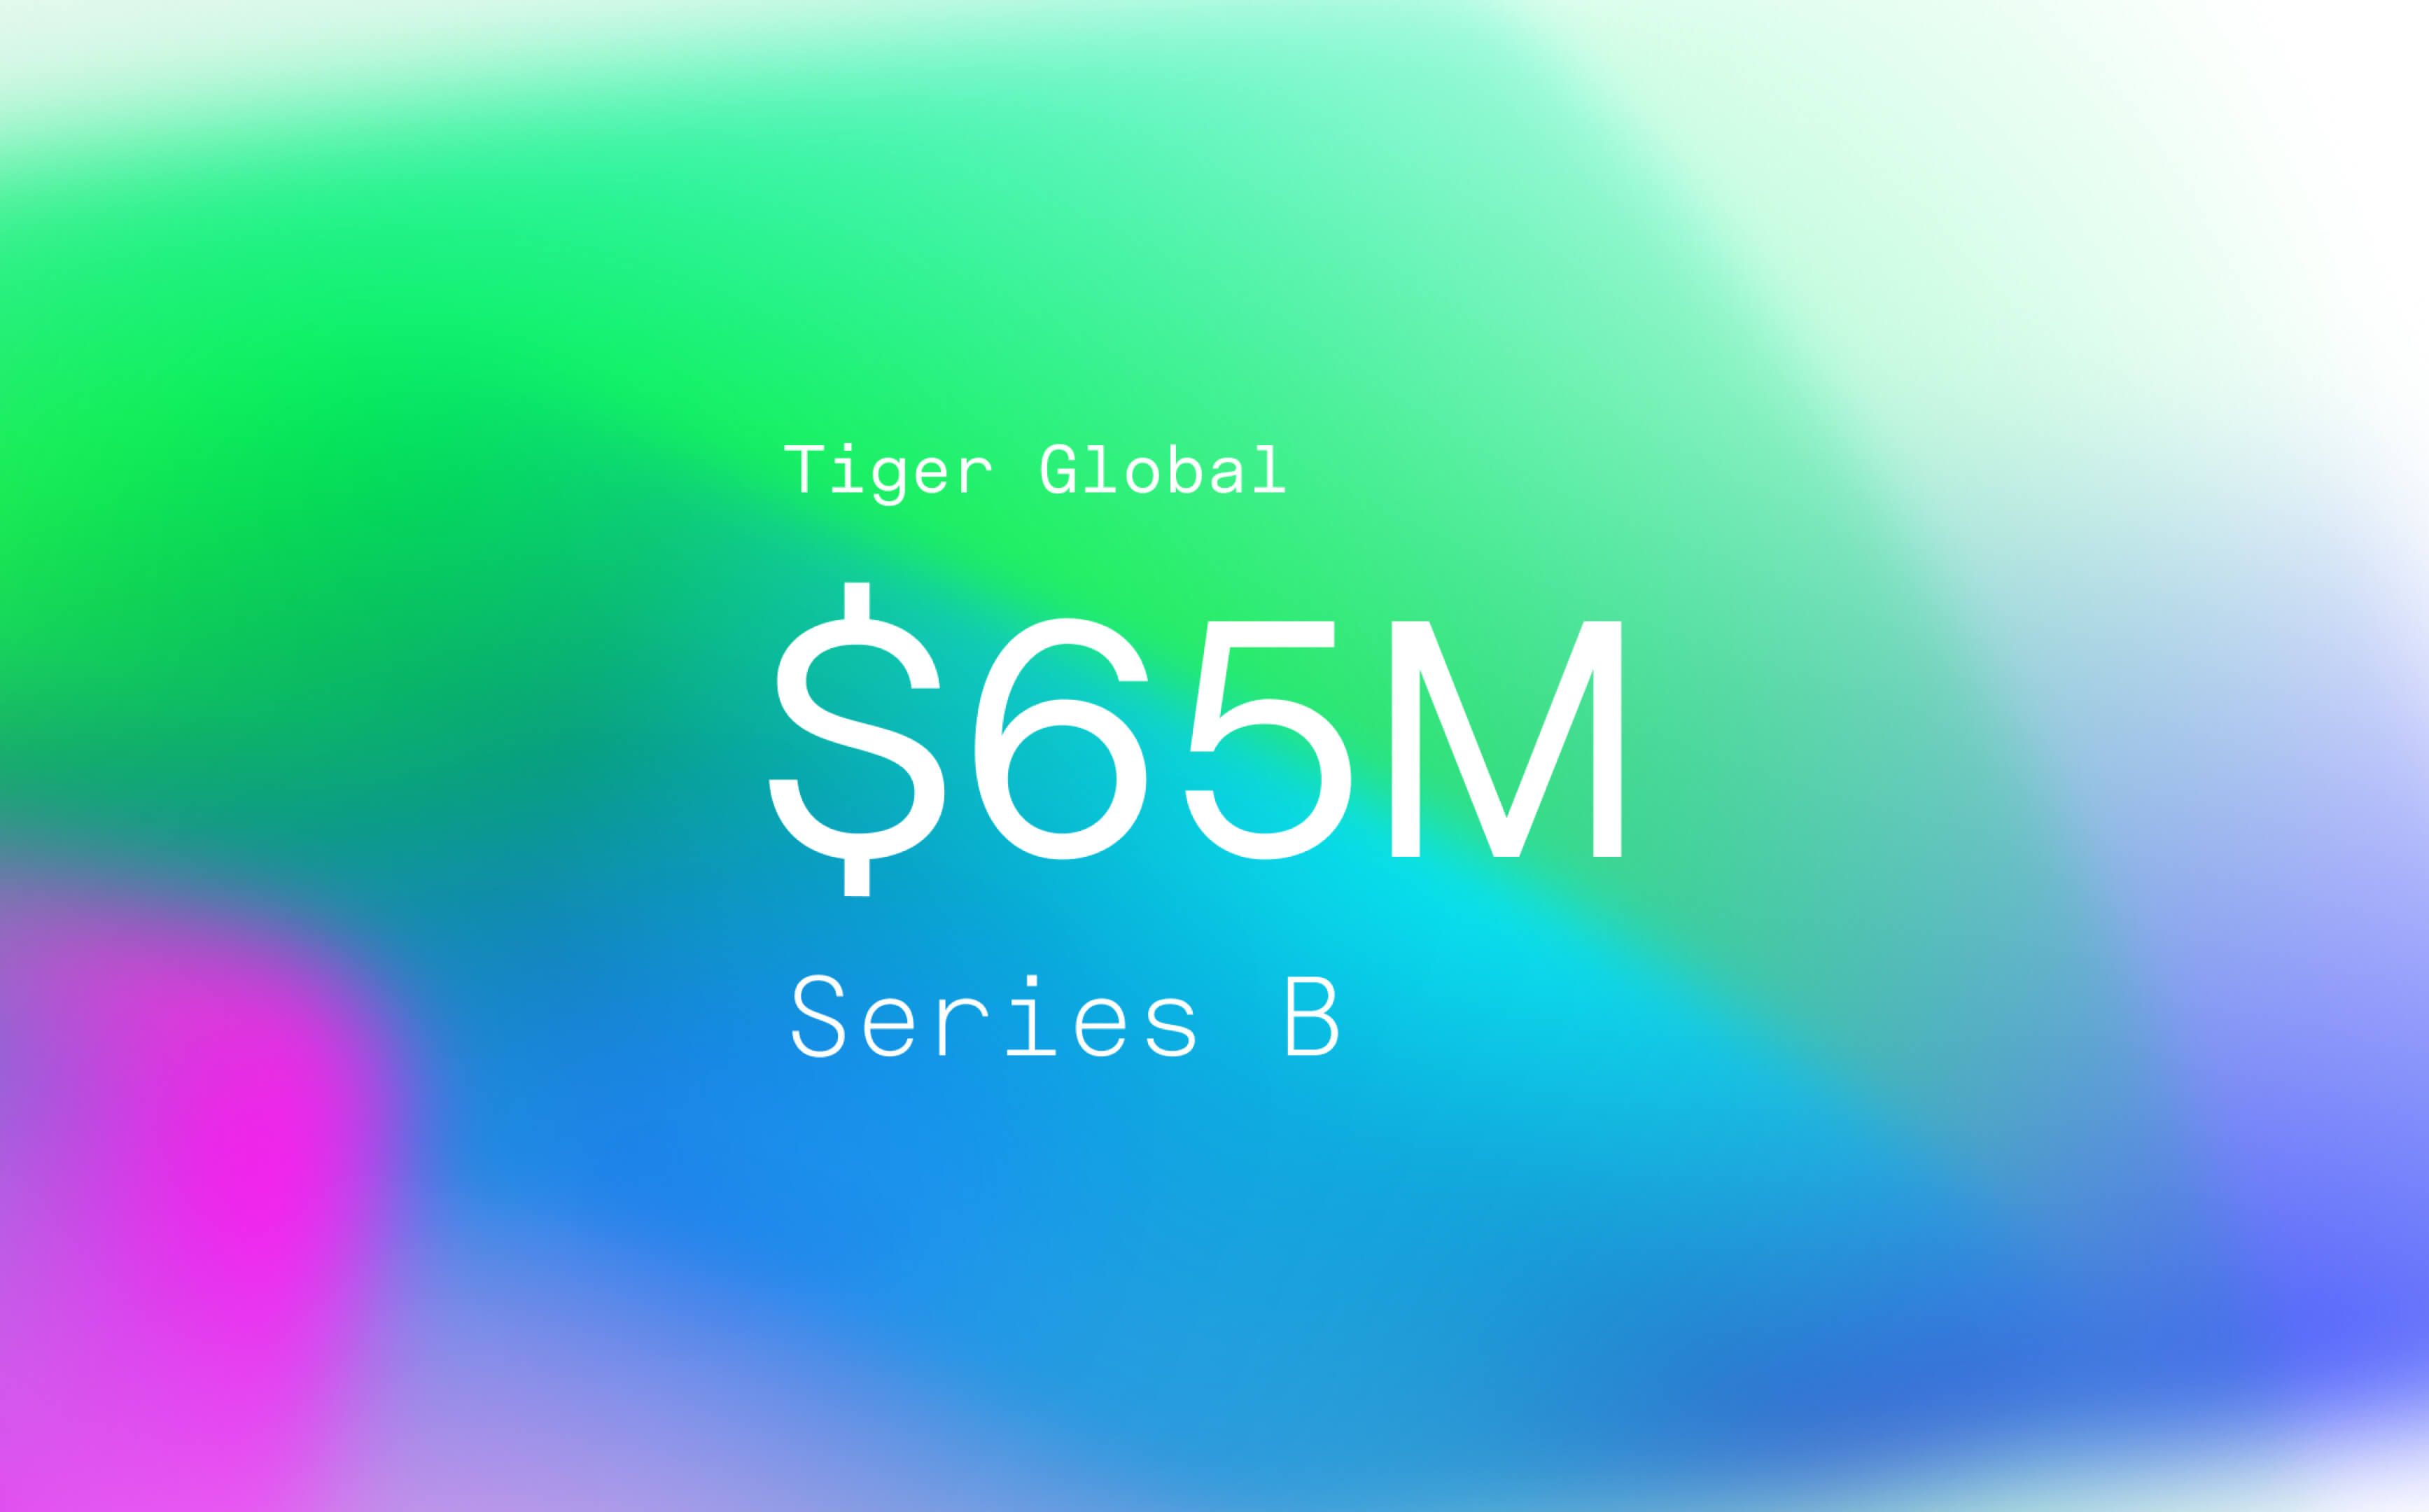 Today, we announced our Series B round of funding of $65 Million, led by Tiger Global.